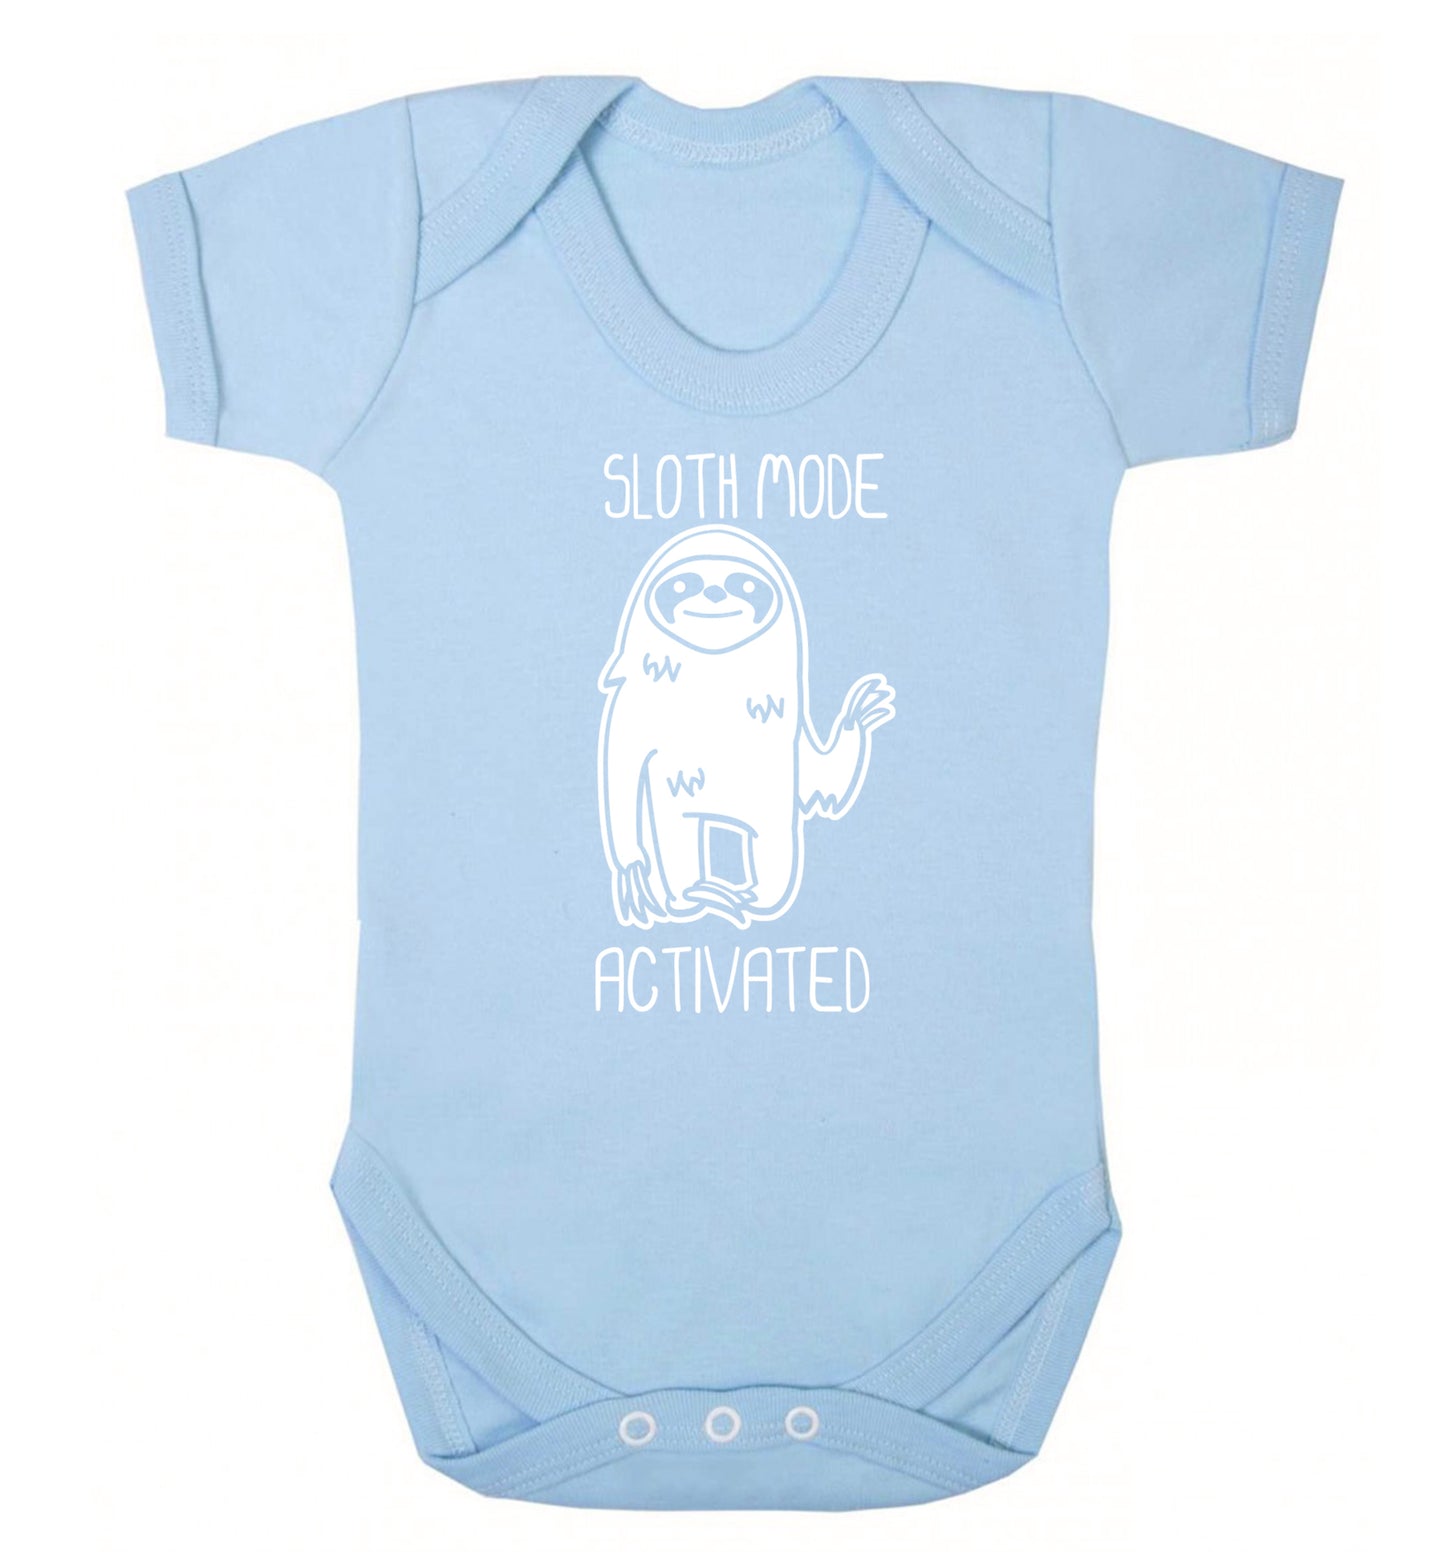 Sloth mode acitvated Baby Vest pale blue 18-24 months